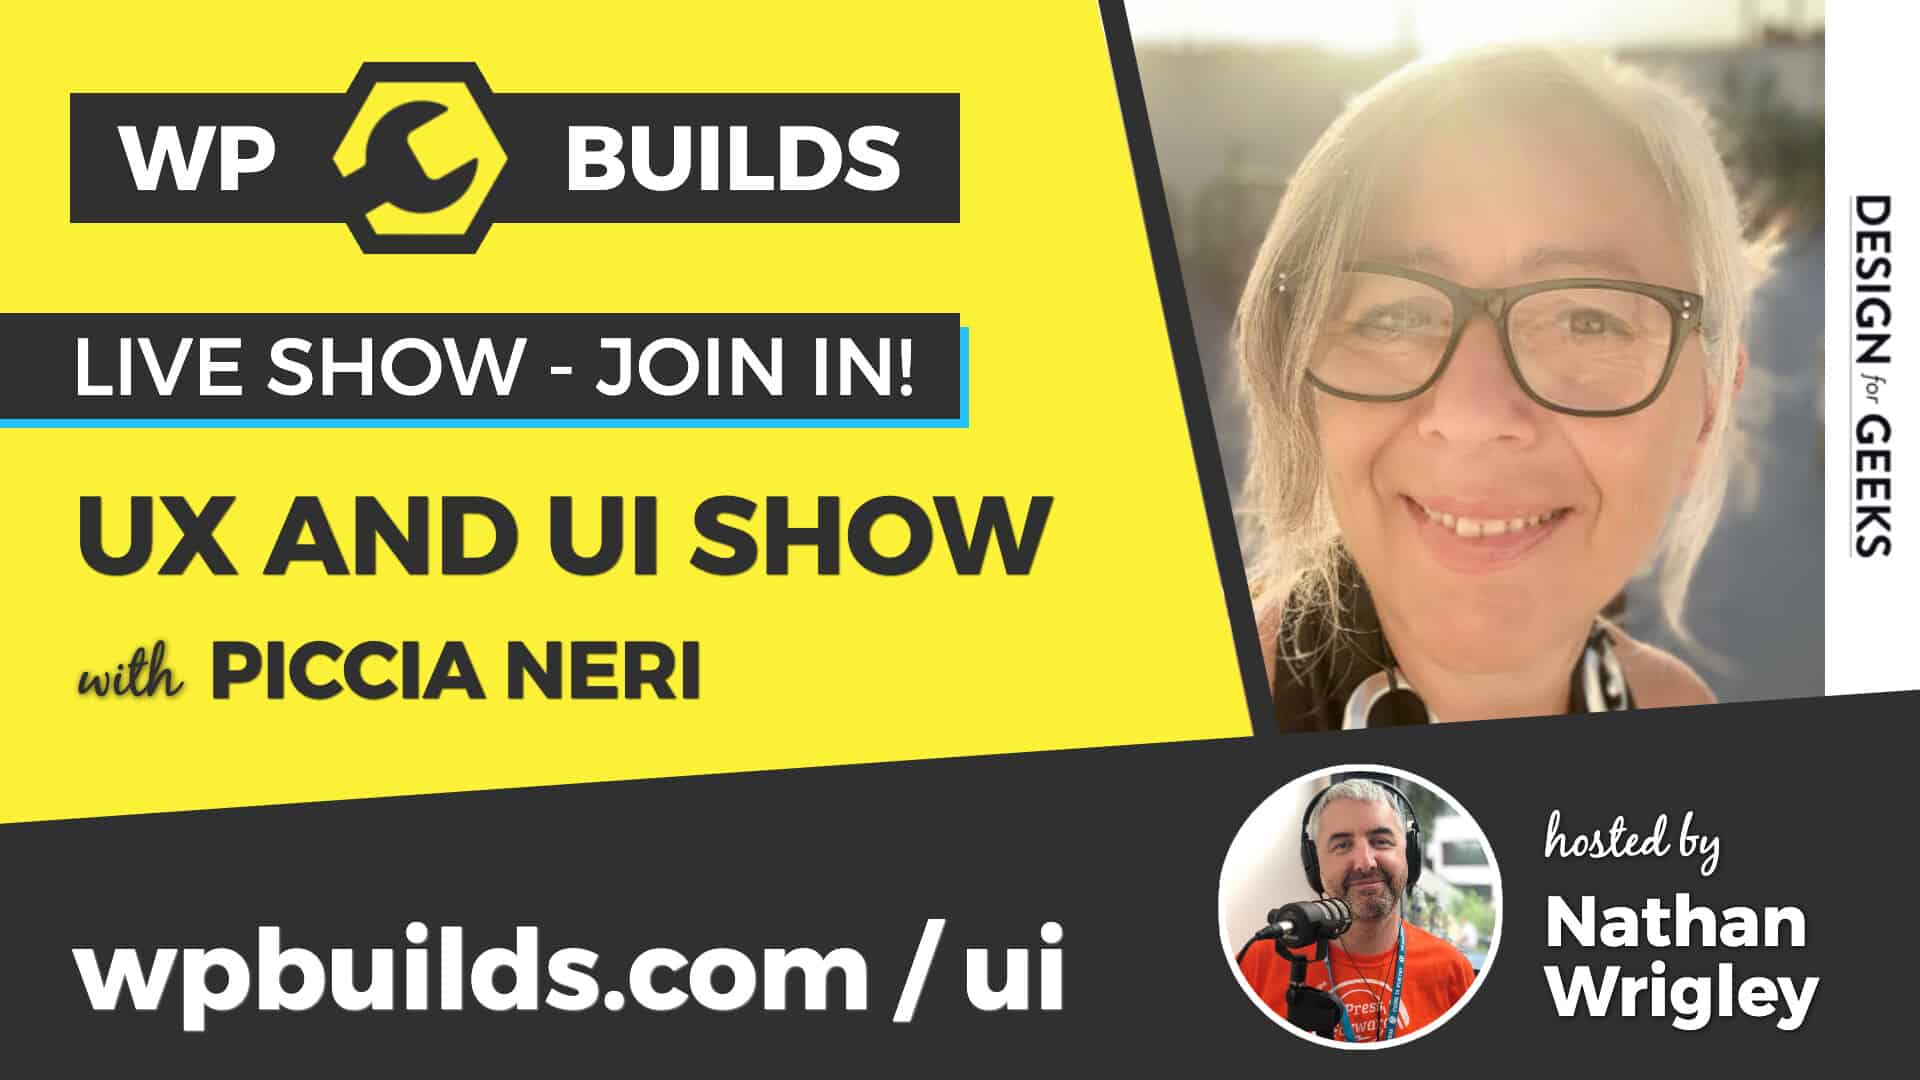 WP Builds UI/UX Show with Piccia Neri